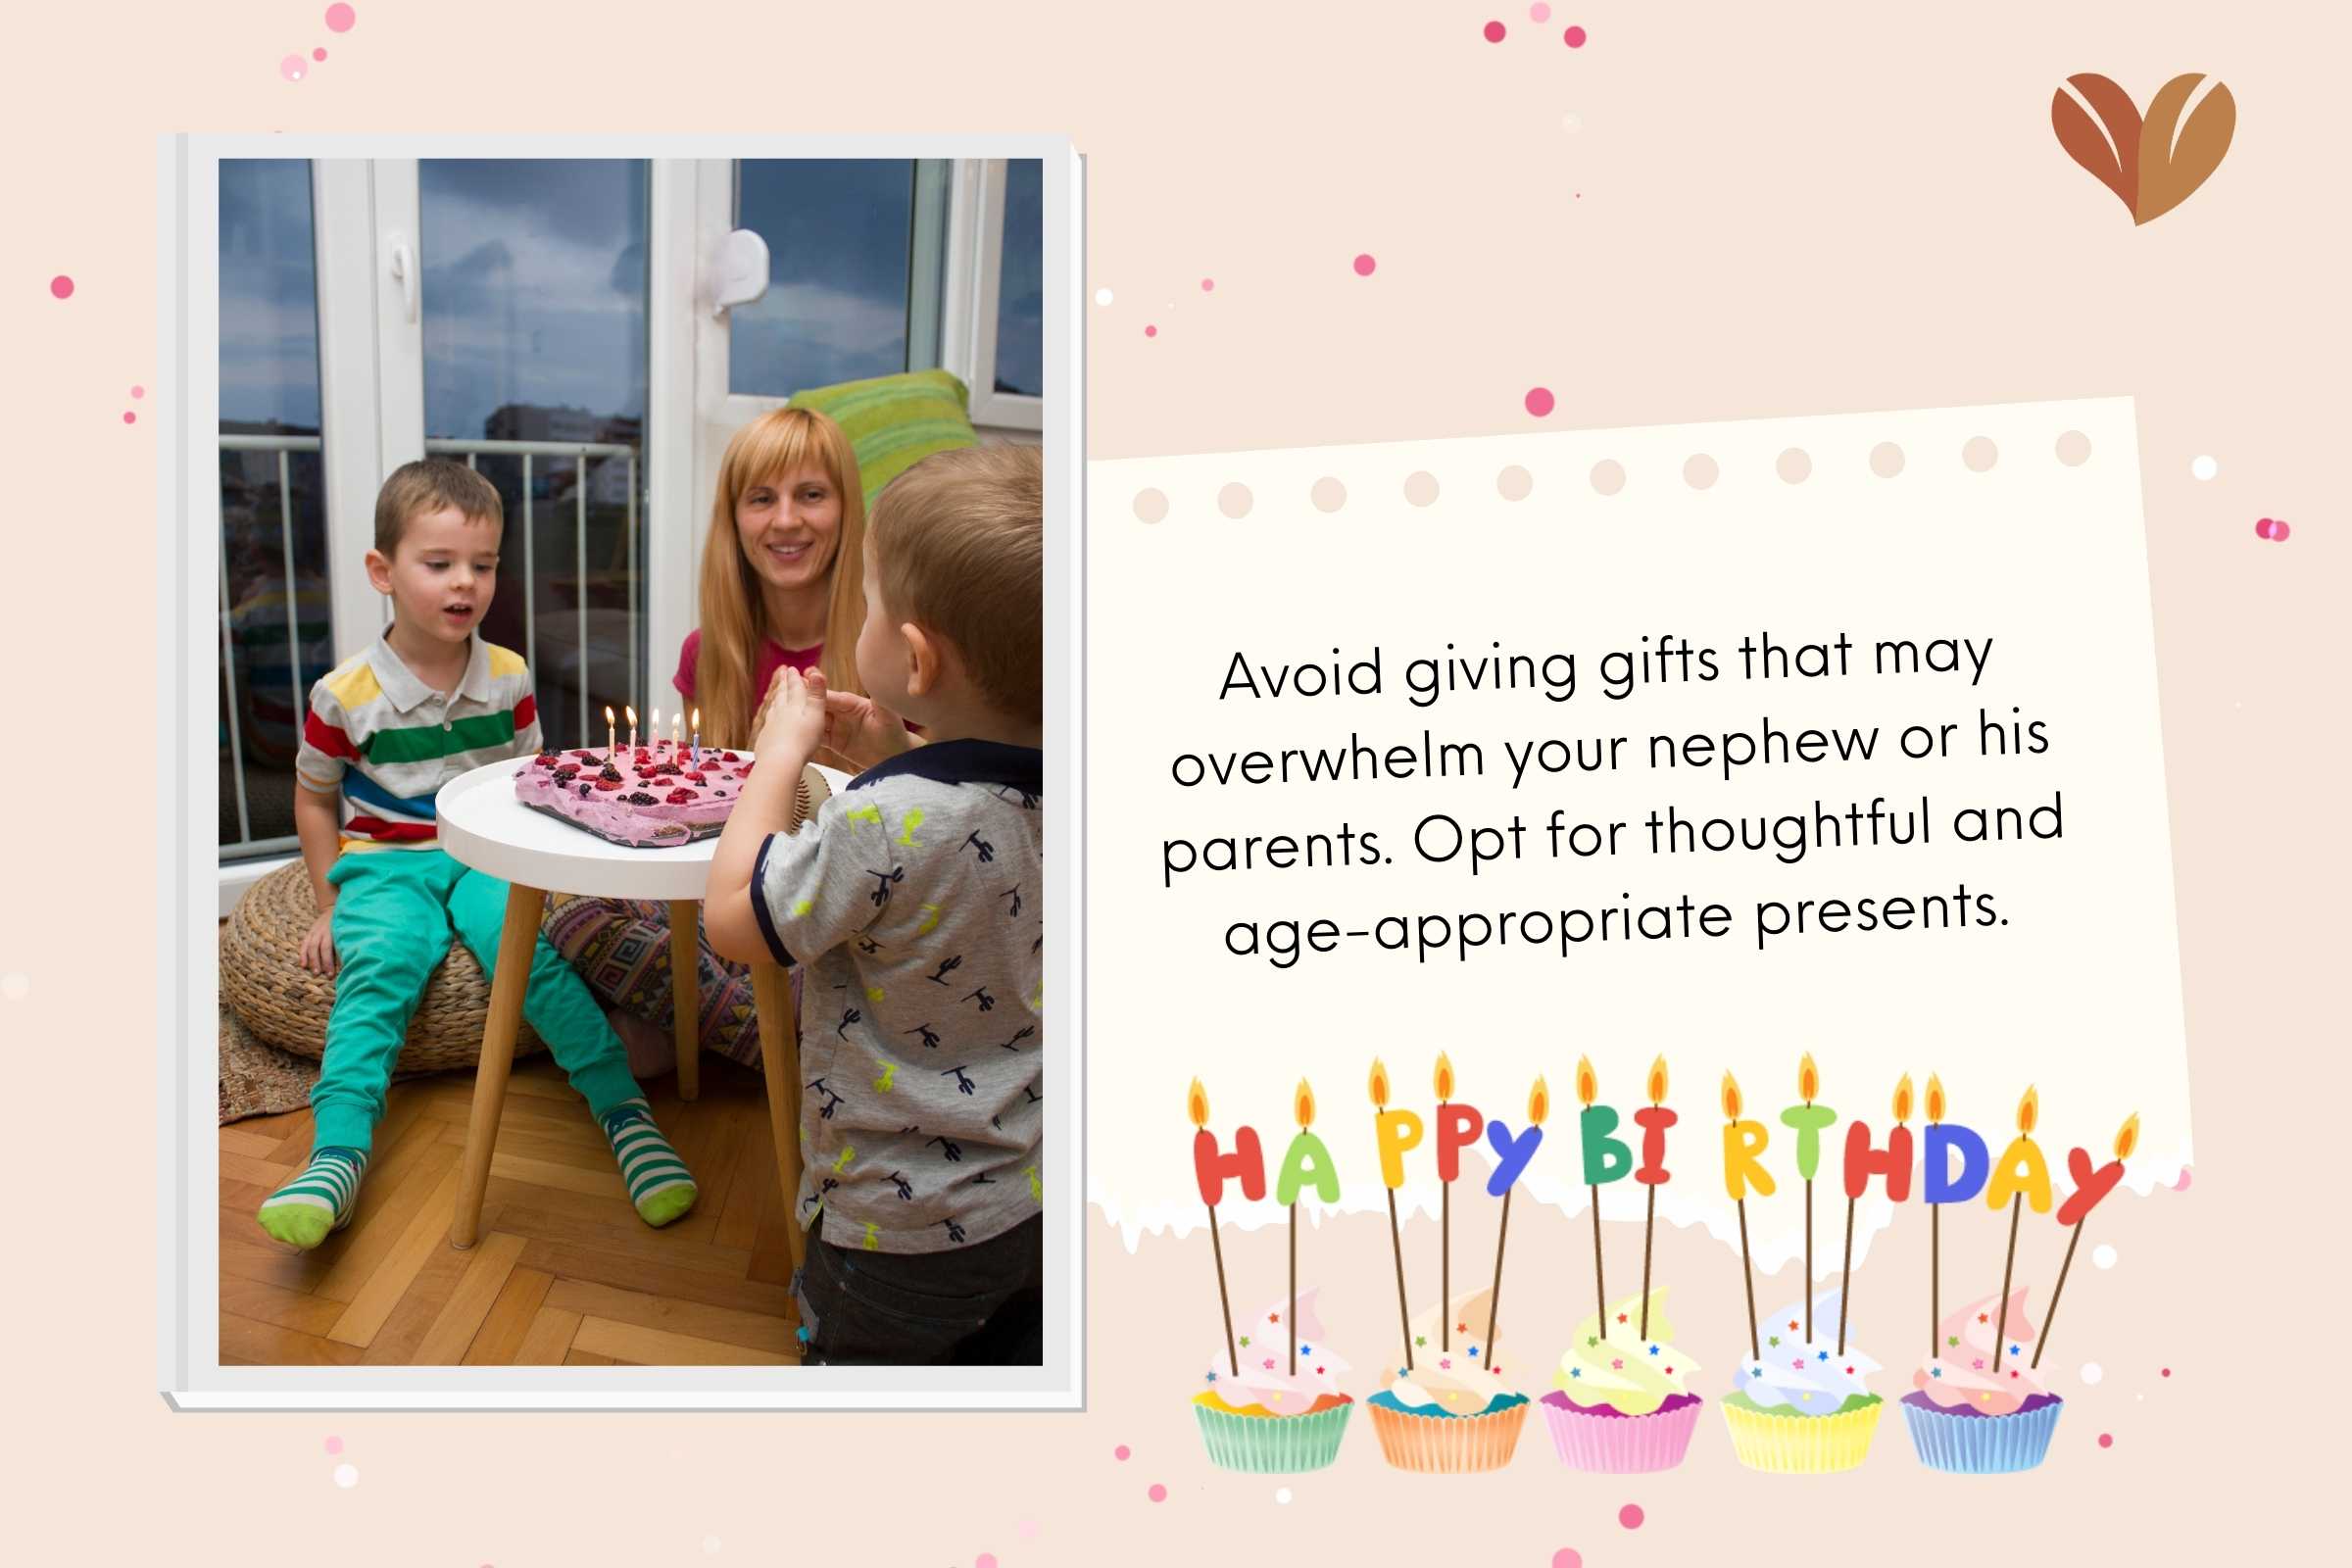 Aunt's love in words: beautiful birthday wishes for a nephew from aunt.